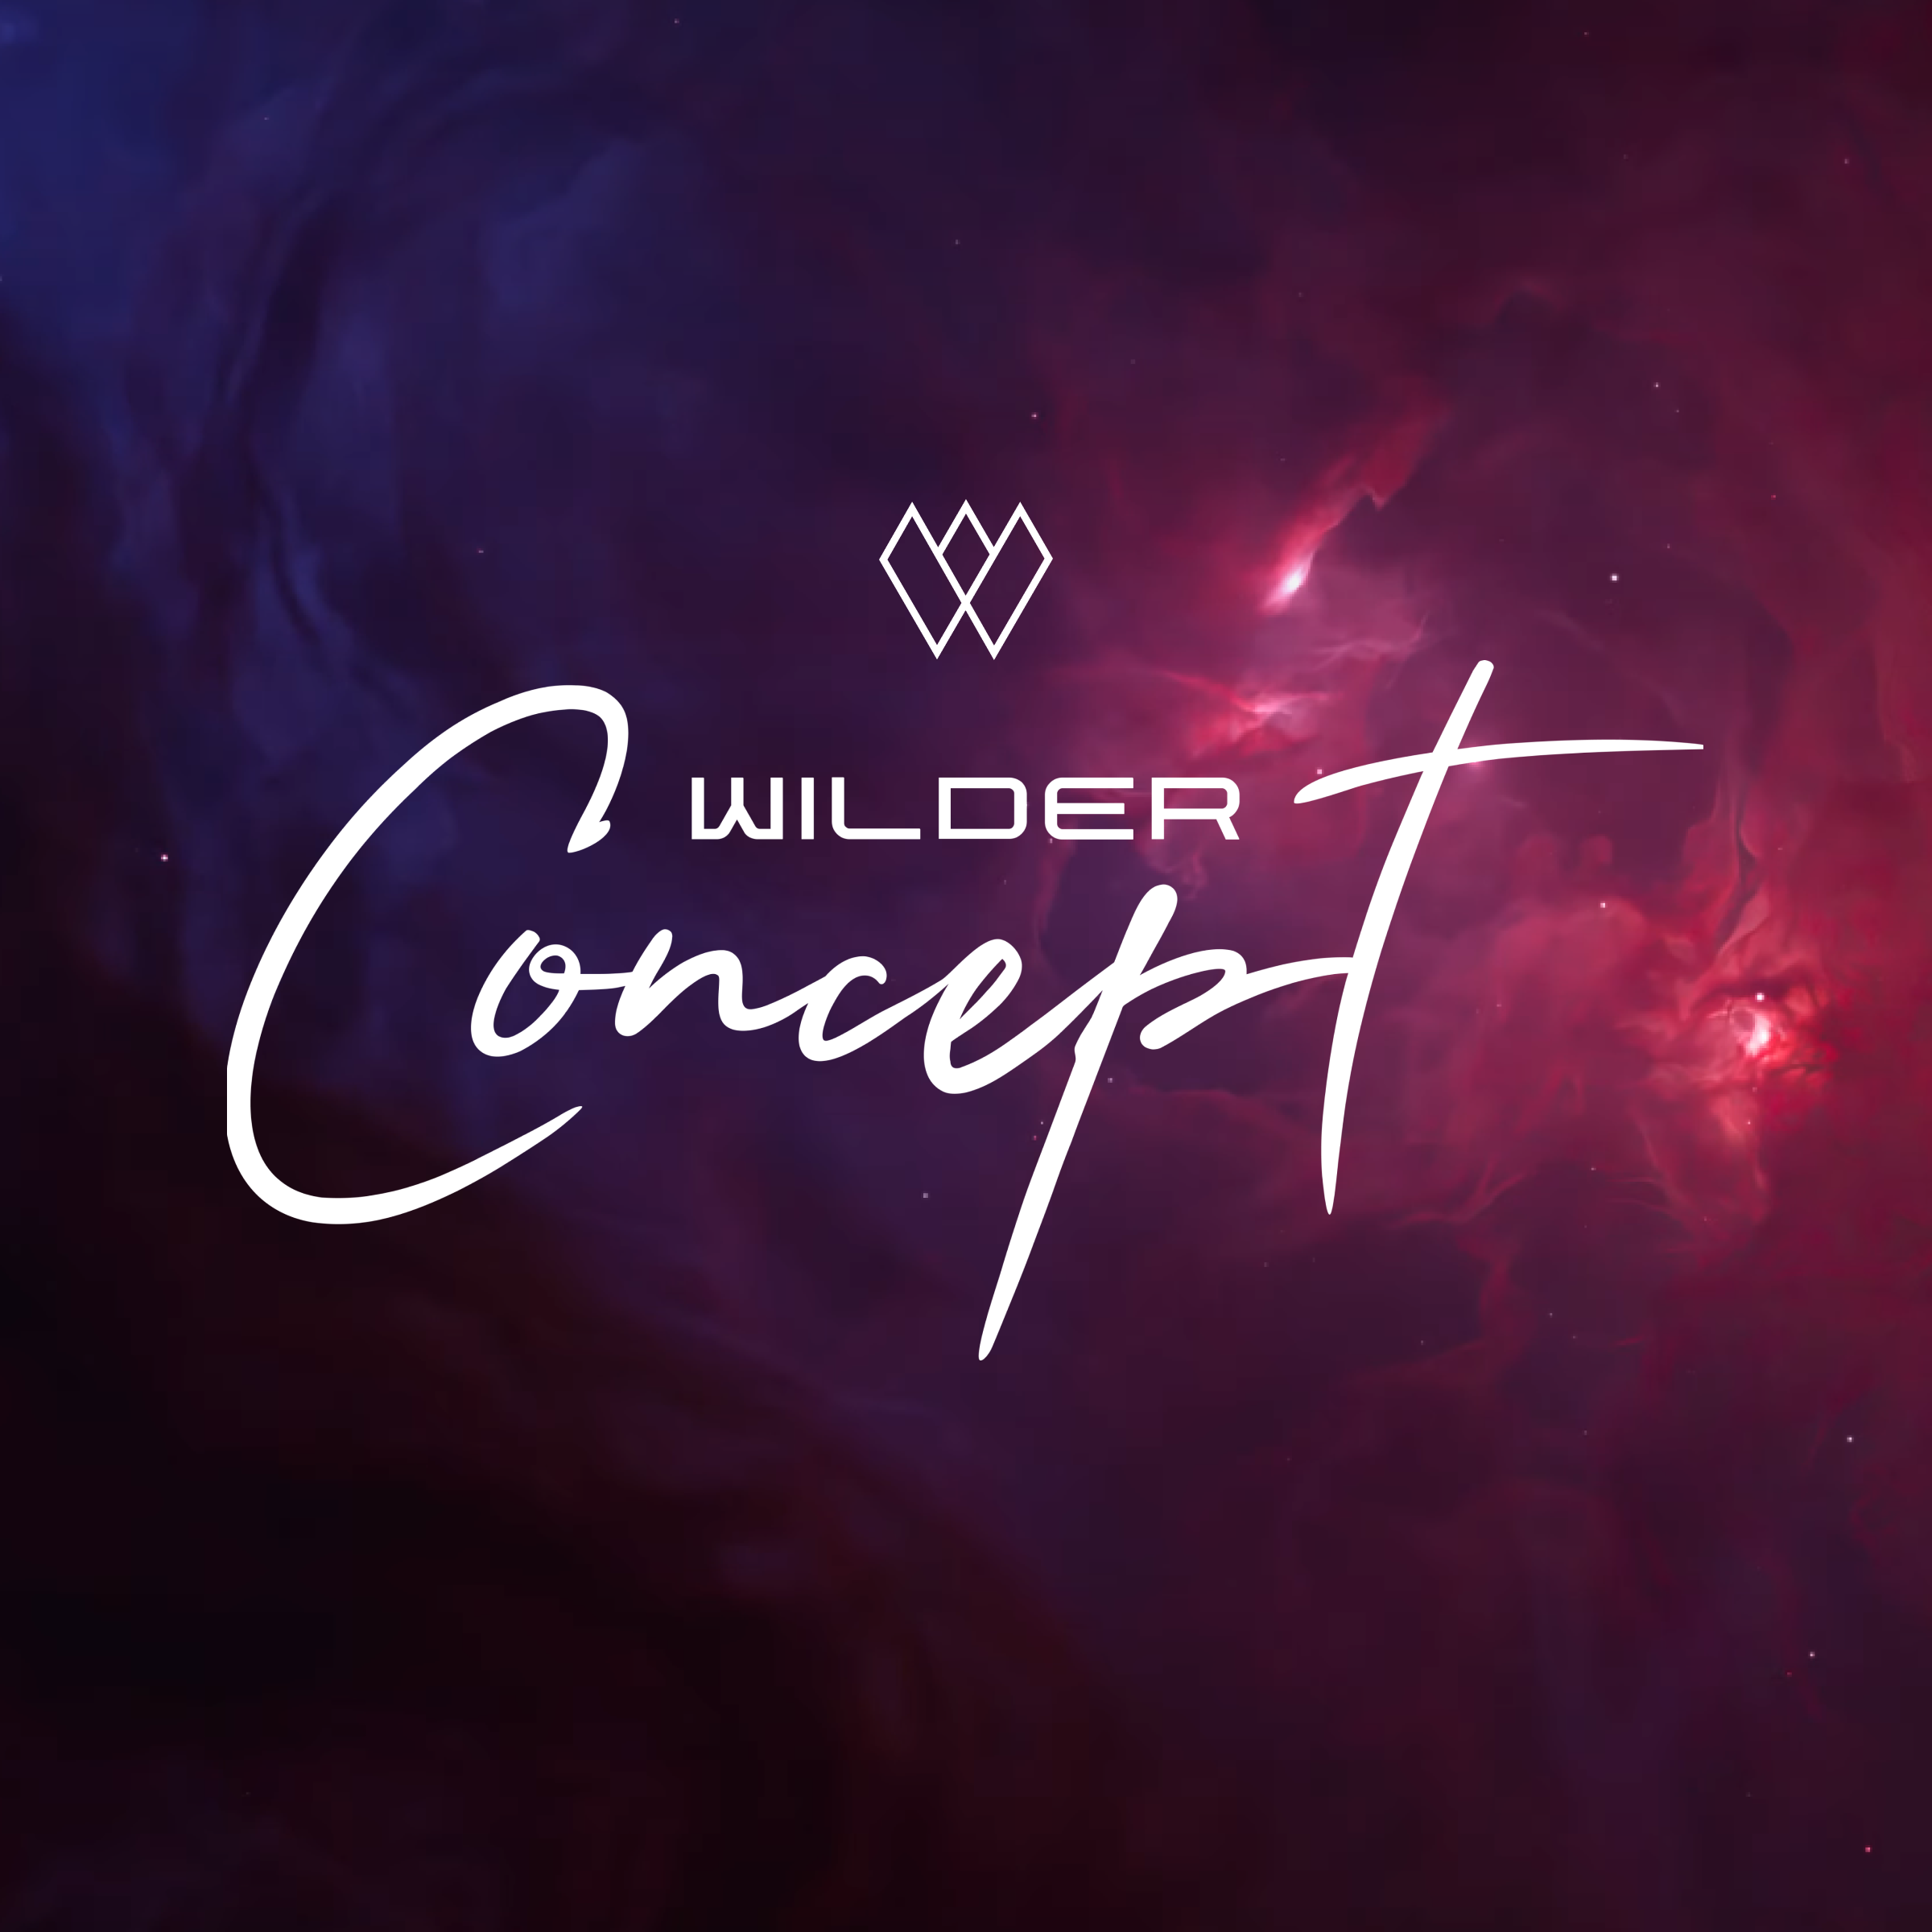 Presenting our newest Metaverse industry - Wilder.Concept